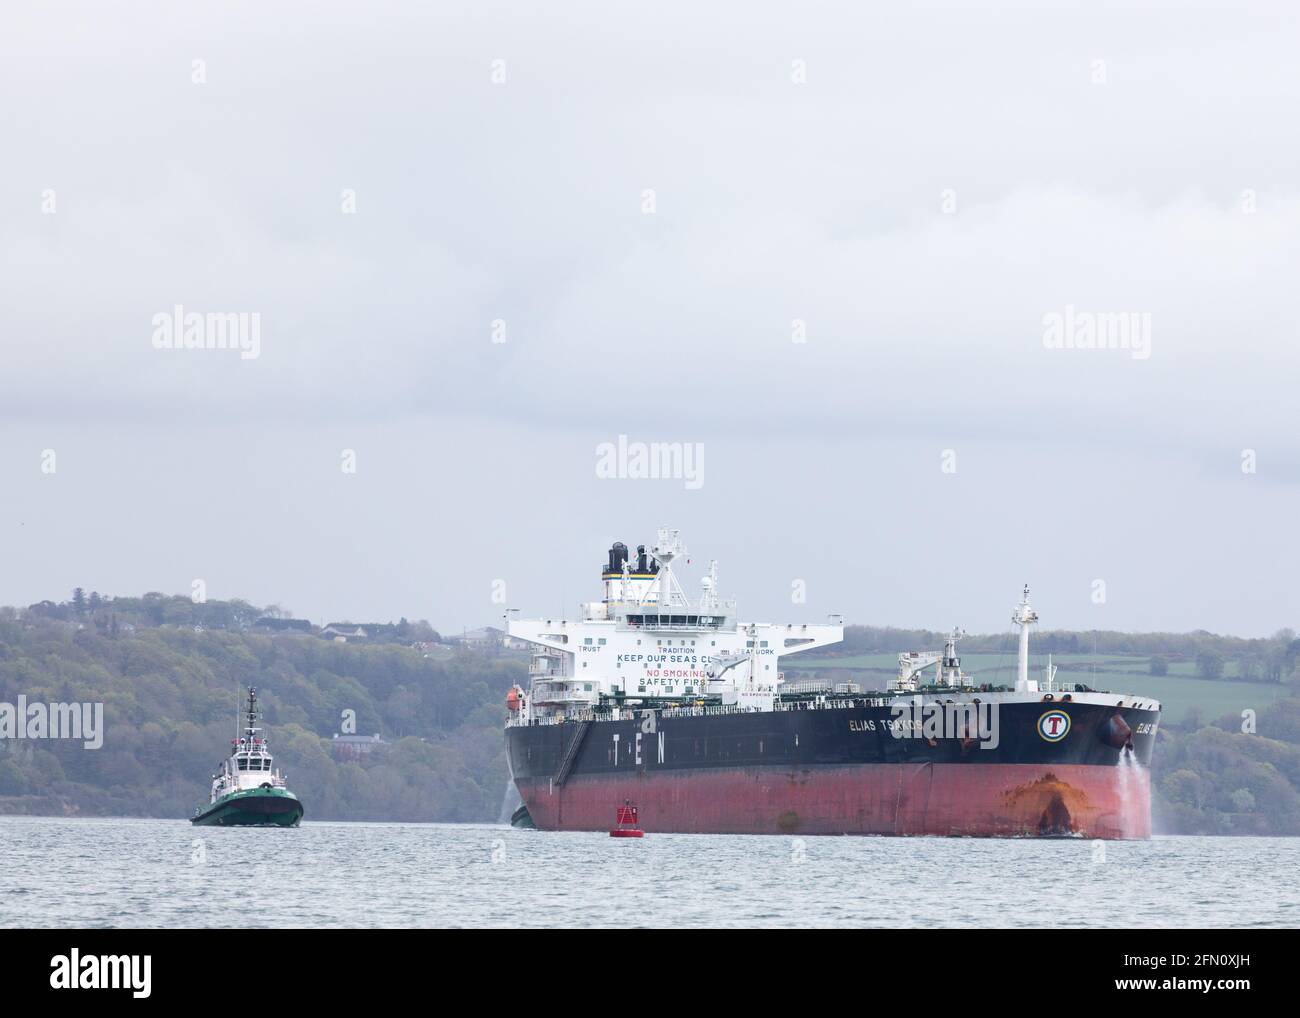 Whitegate, Cork, Ireland. 12th May, 2021. Oil tanker Elias Tsakos is assisted by tugboats Titan and Alex as she slowly manoeuvres away from the jetty and departs the harour on her way to Scapa Flow at Whitegate, Co. Cork, Ireland.  - Credit; David Creedon / Alamy Live News Stock Photo